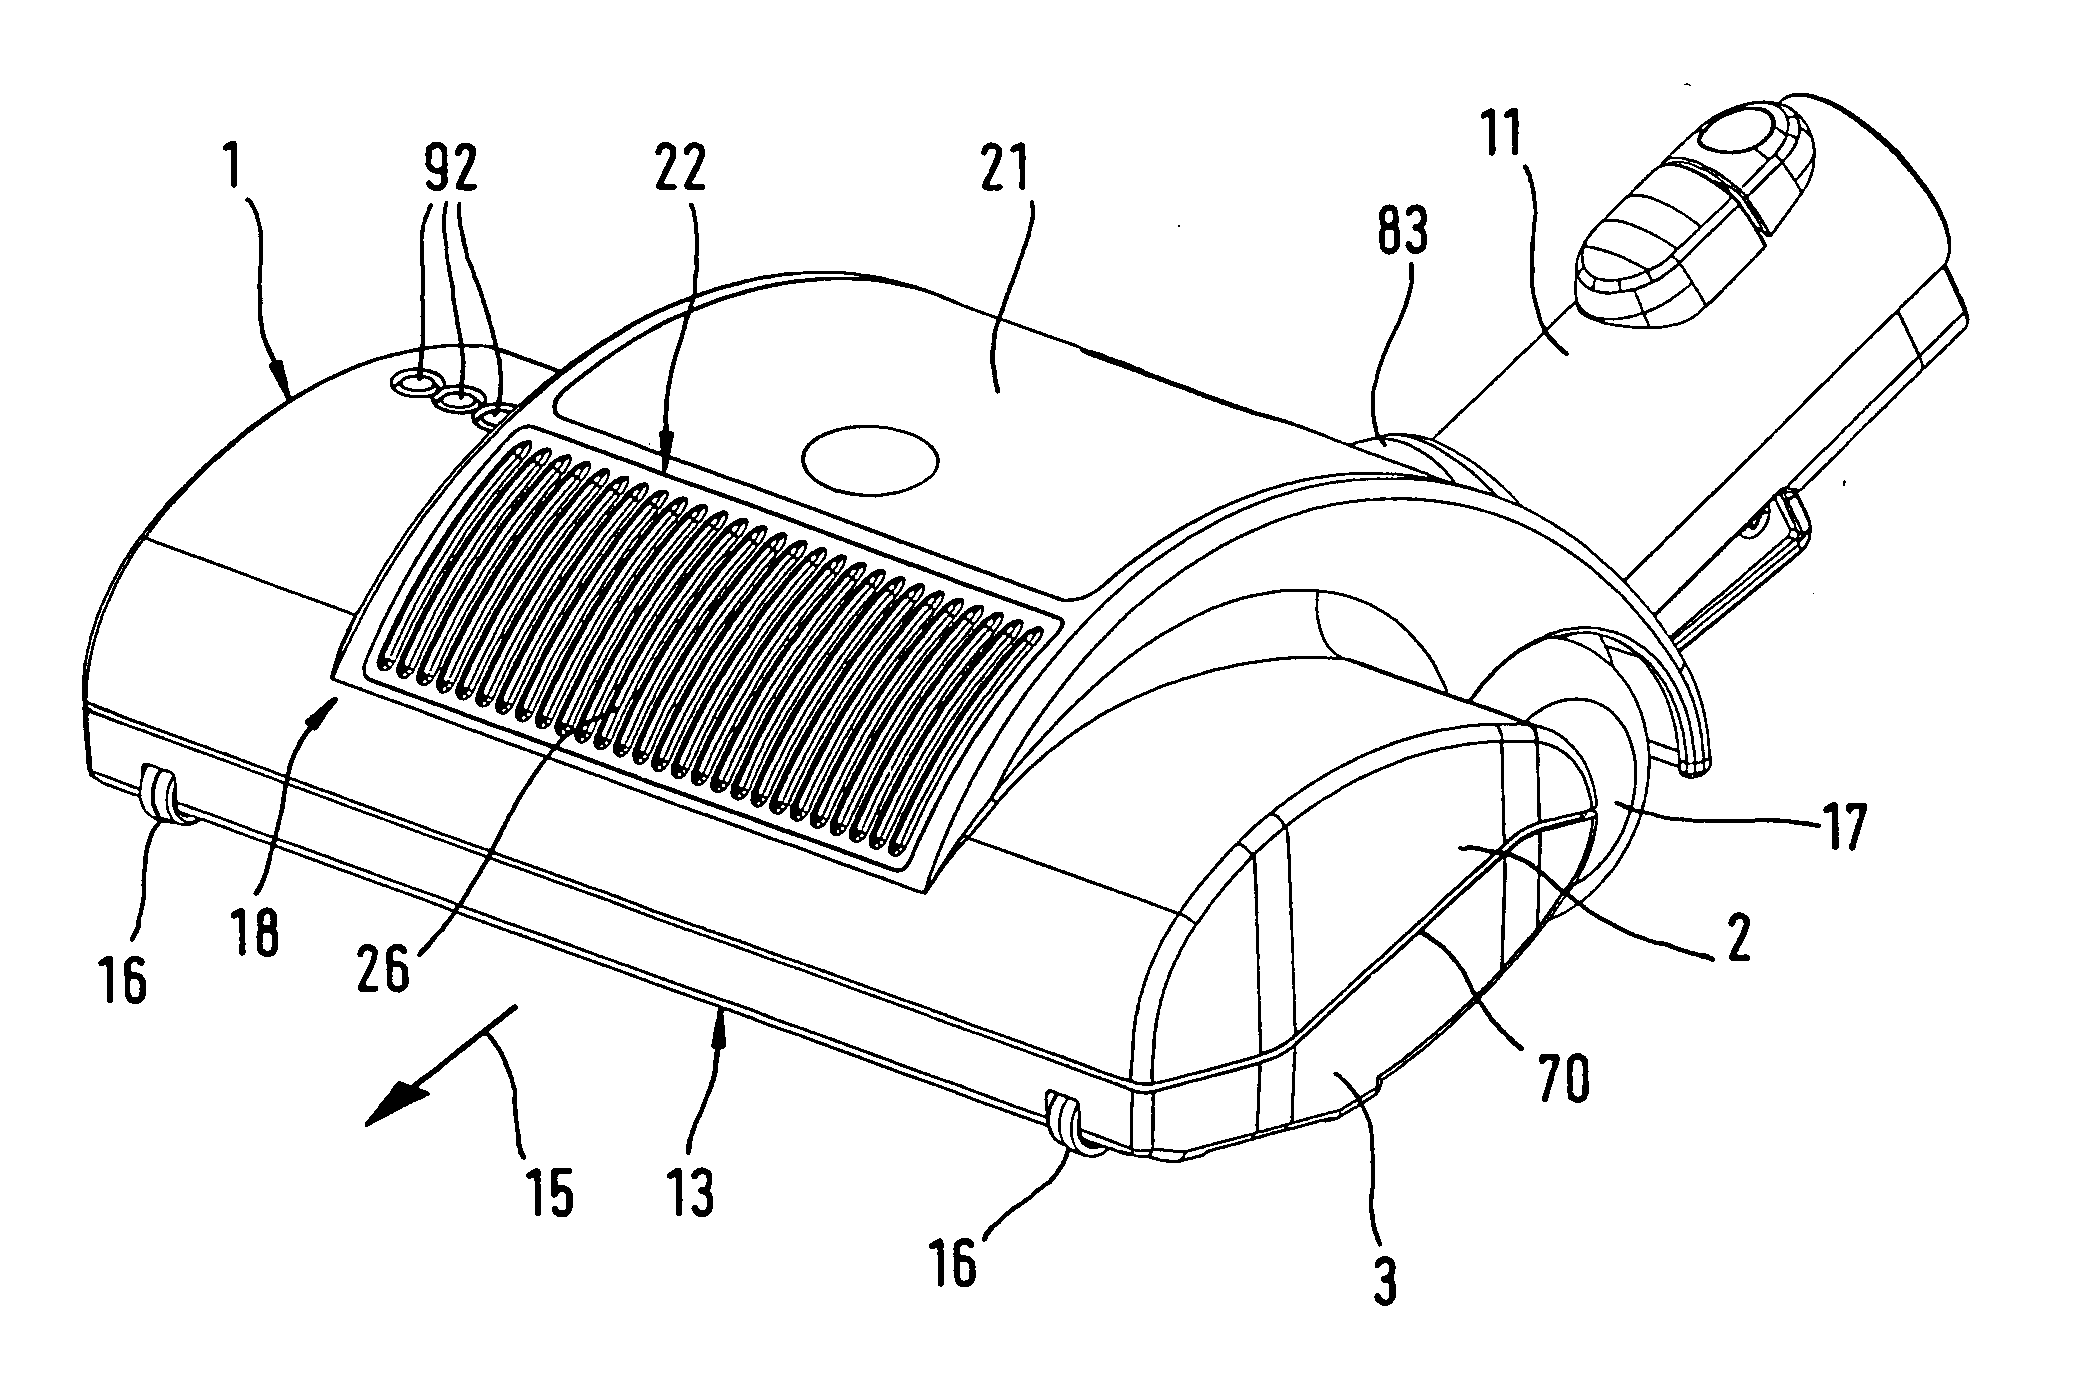 Cleaning Tool for Floor Surfaces Having an Illumination Element for a Working Area